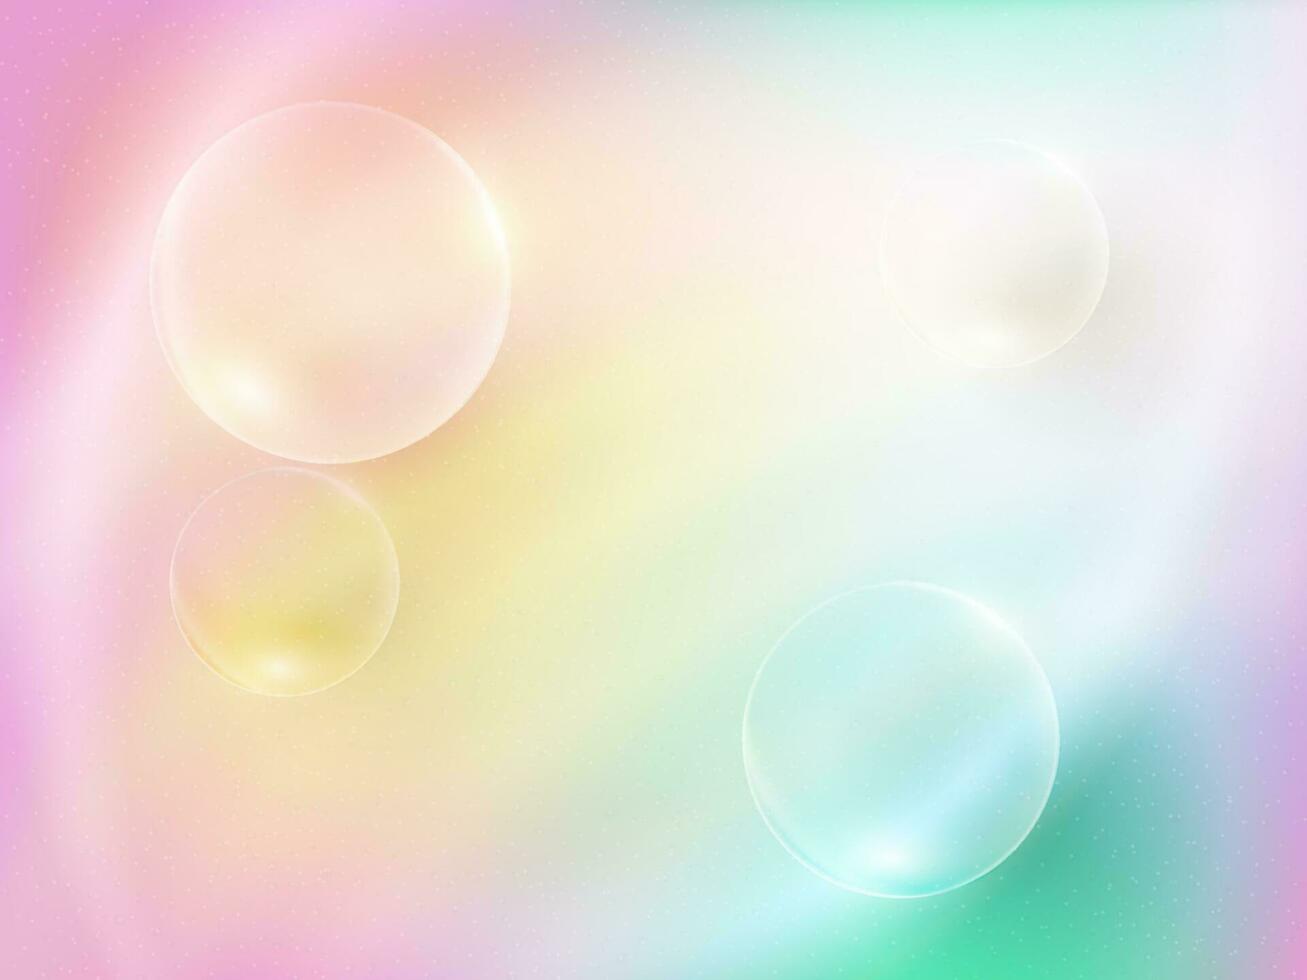 Glossy Abstract Gradient Mesh Background With Transparent Bubbles. vector